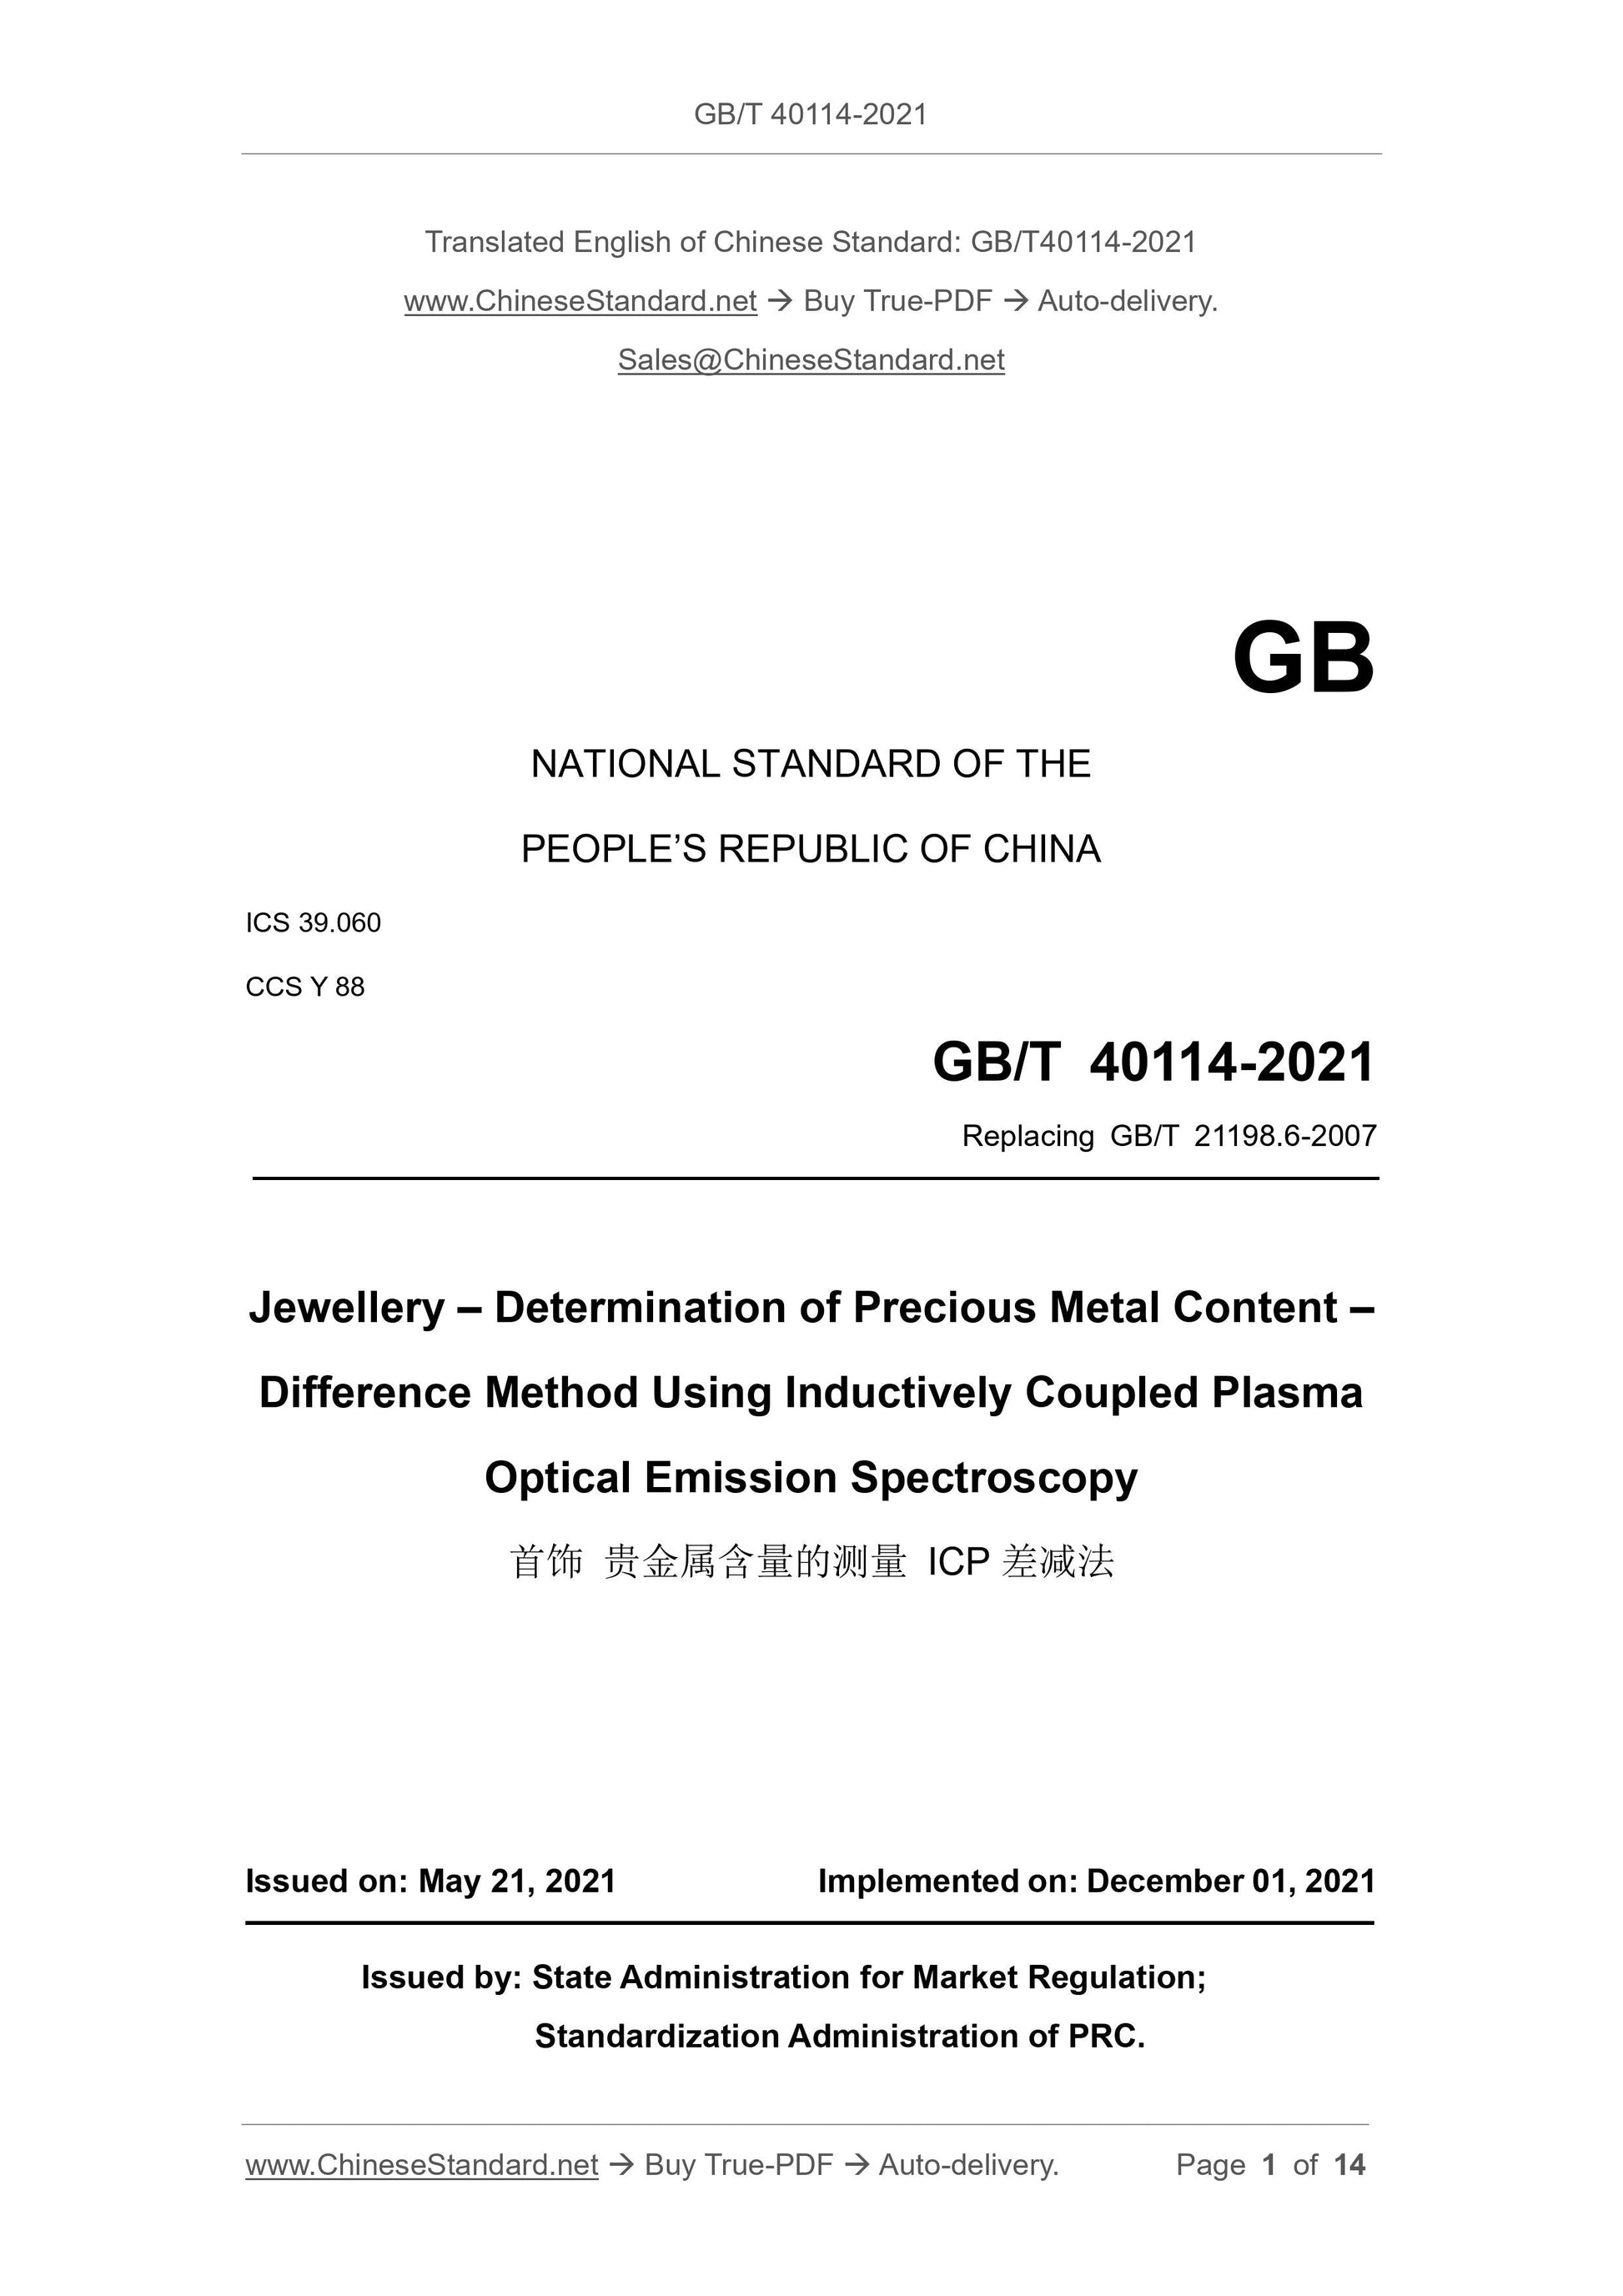 GB/T 40114-2021 Page 1